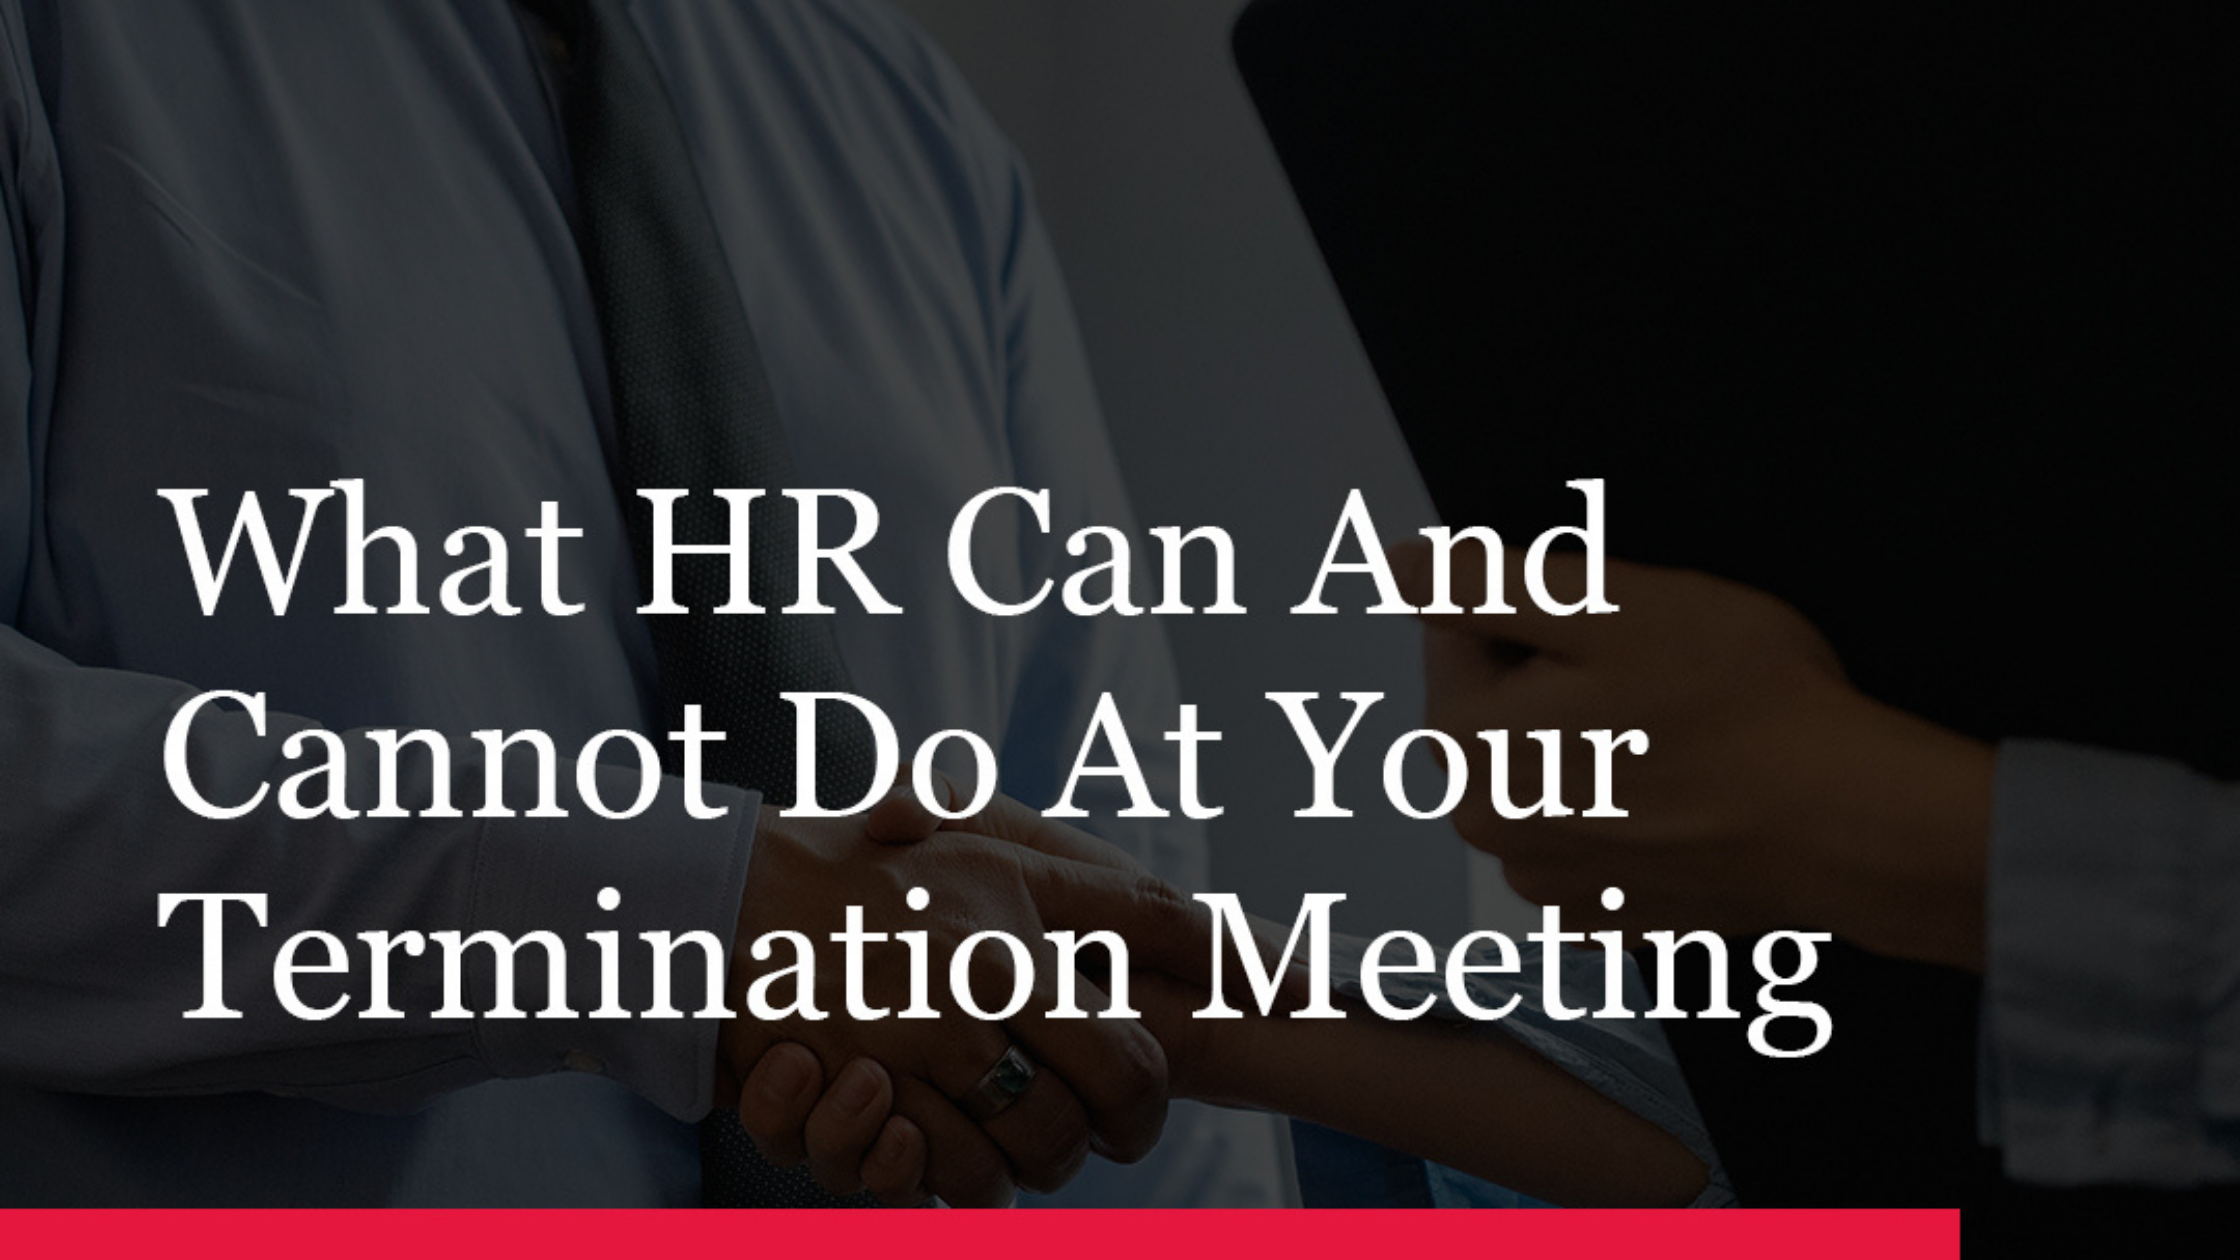 HR at your termination meeting